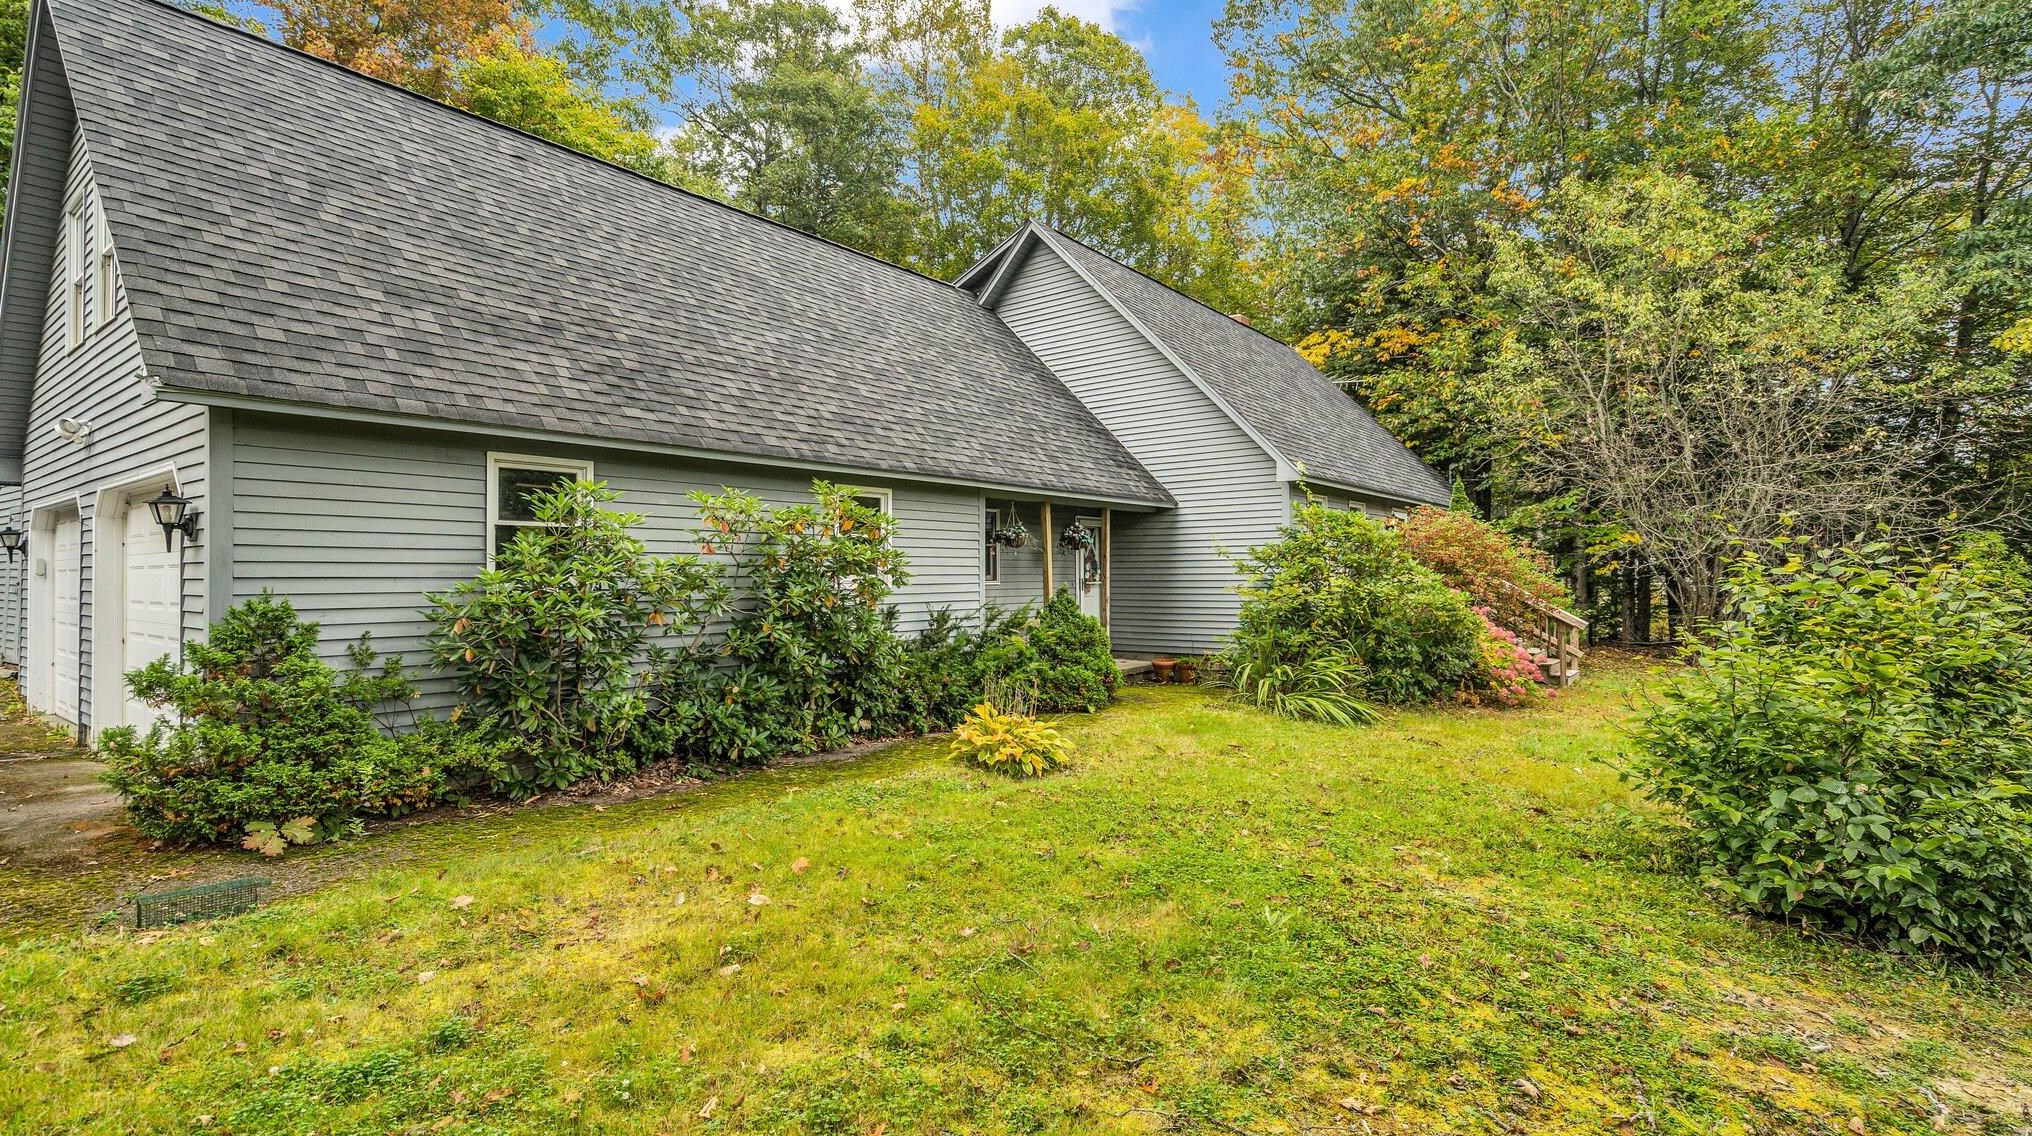 4 Coolidge St, Waterville, ME 04901